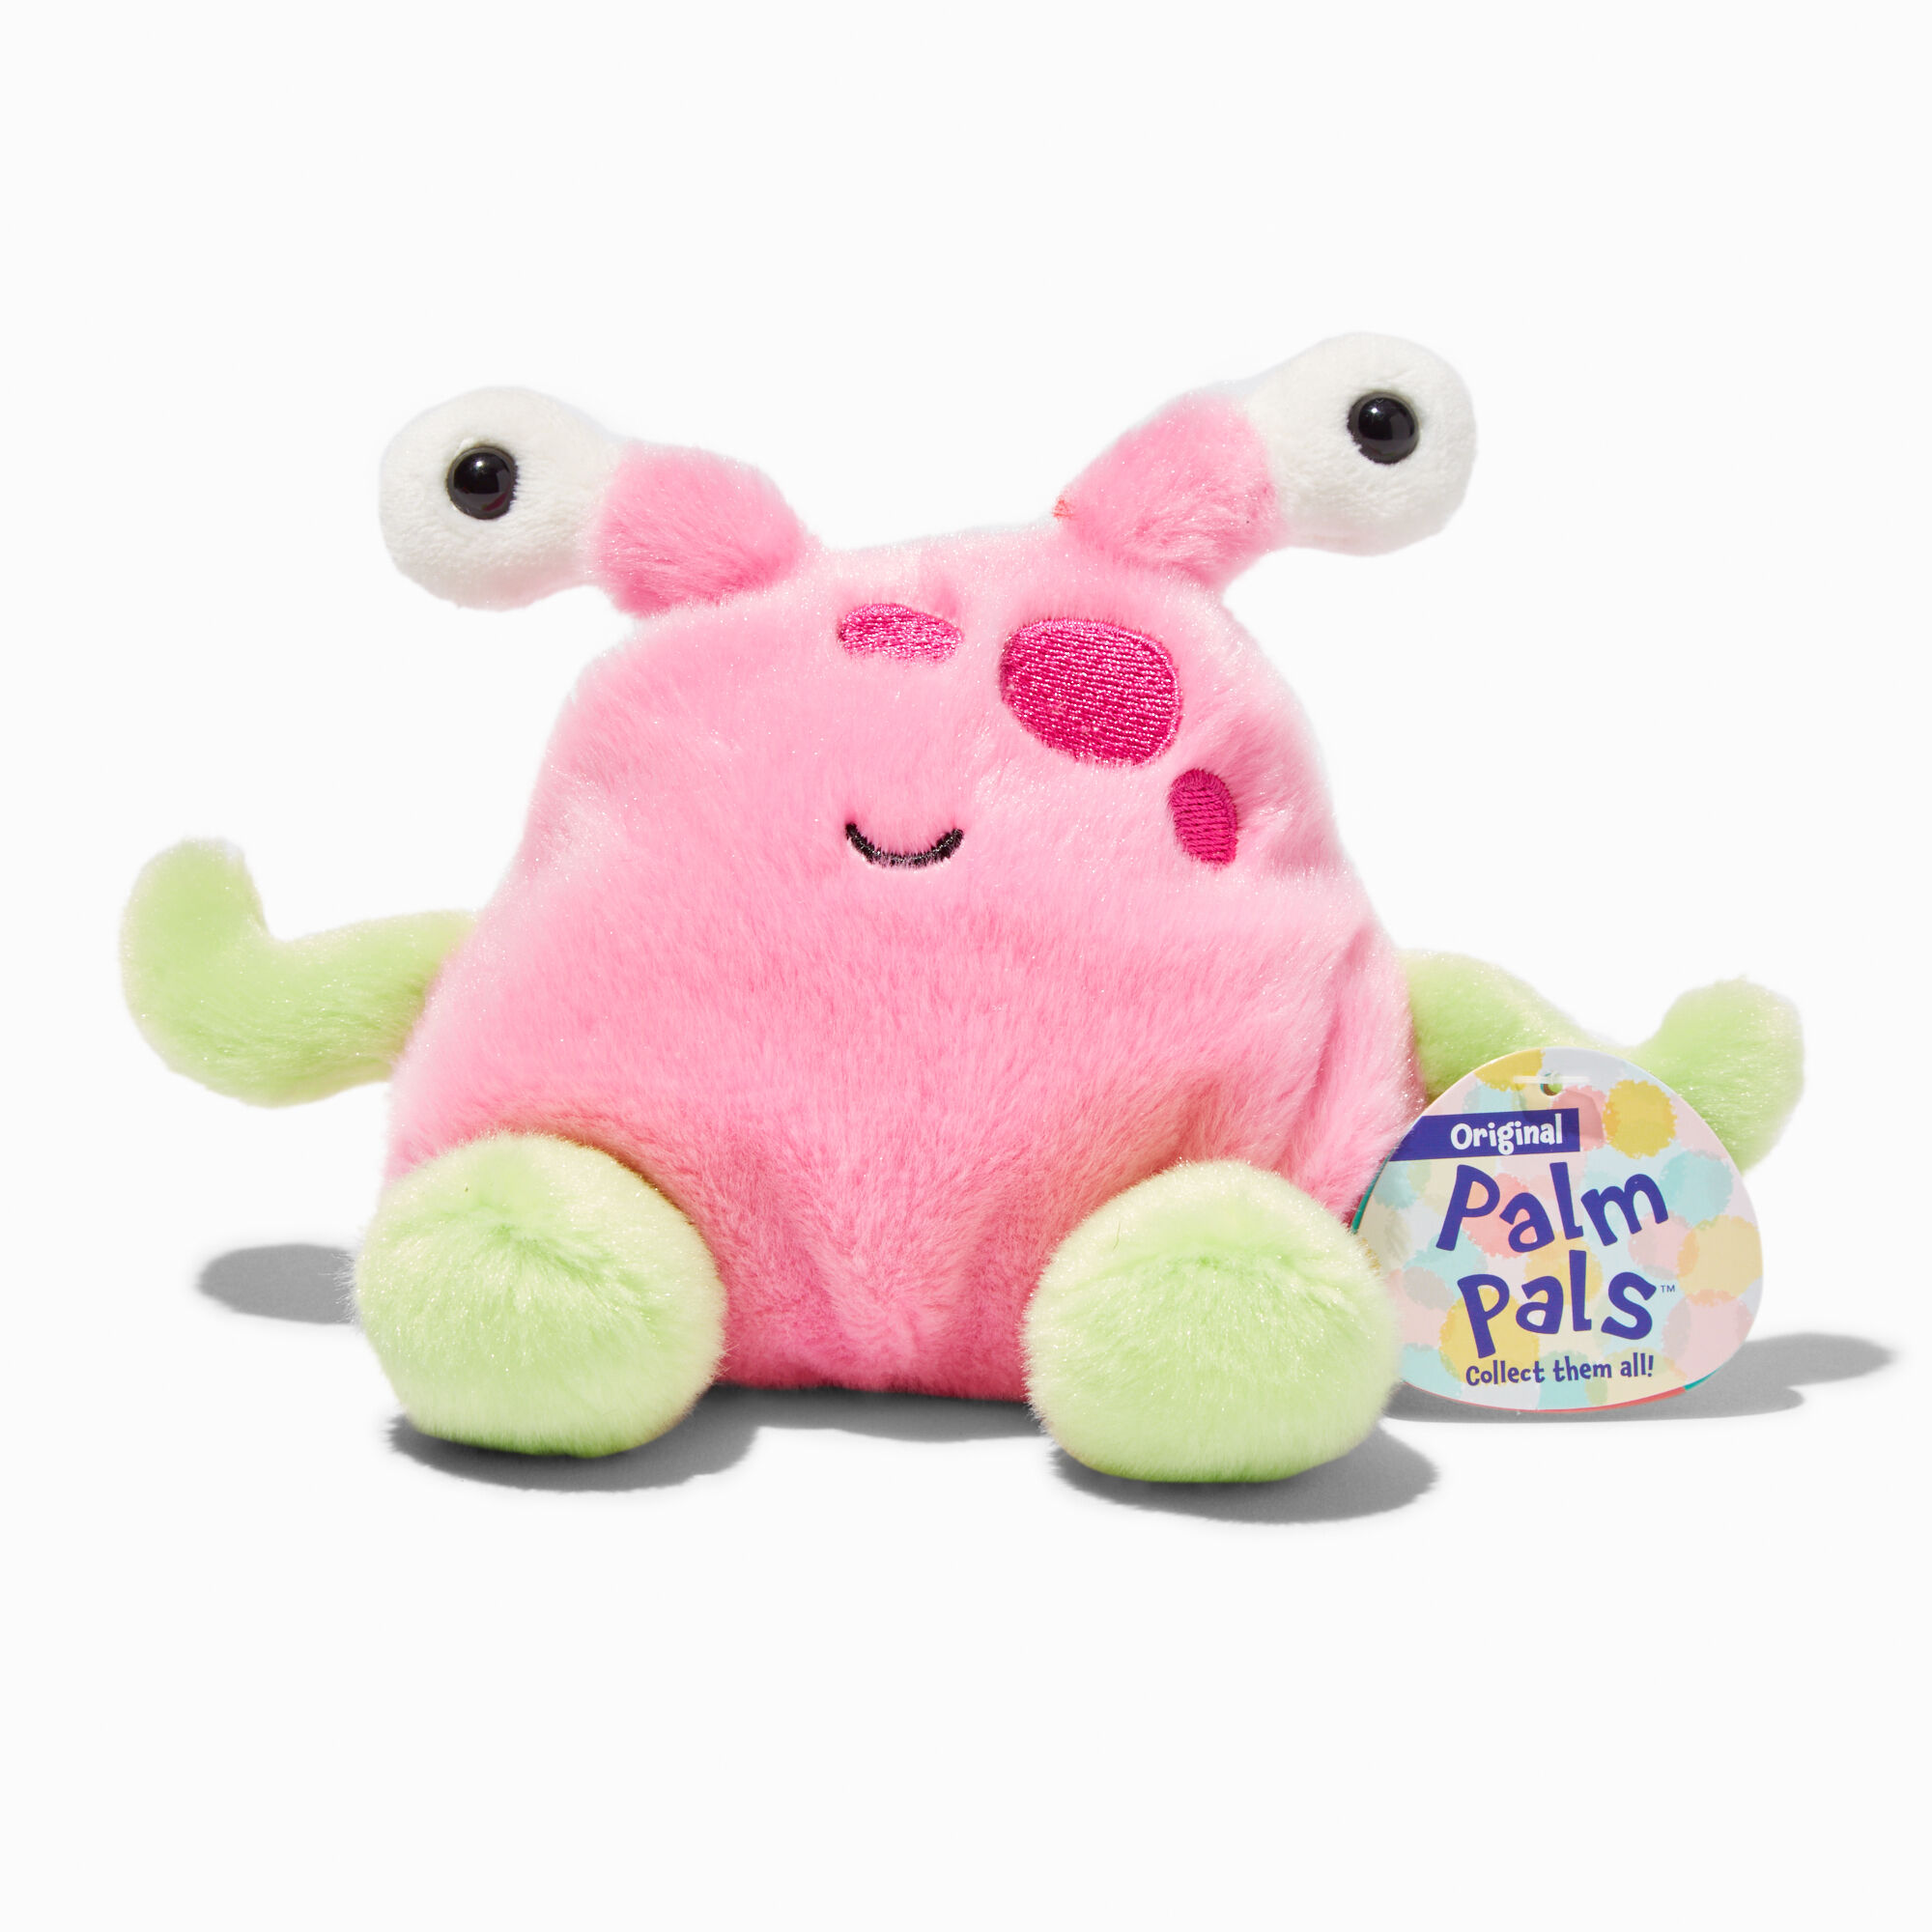 View Claires Palm Pals Silly 5 Plush Toy information